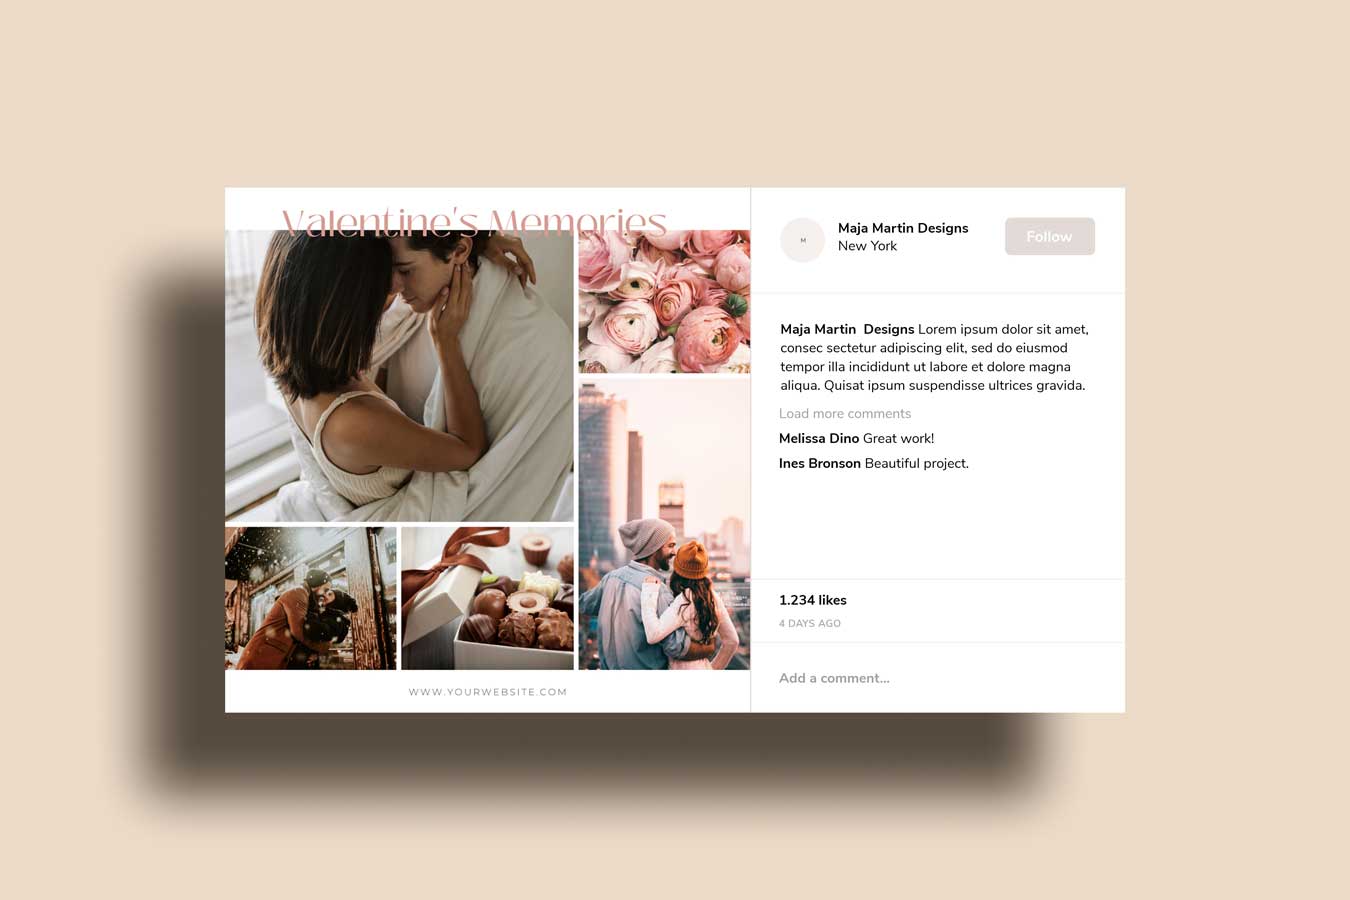 Valentine's Day Social Media Templates from Canva